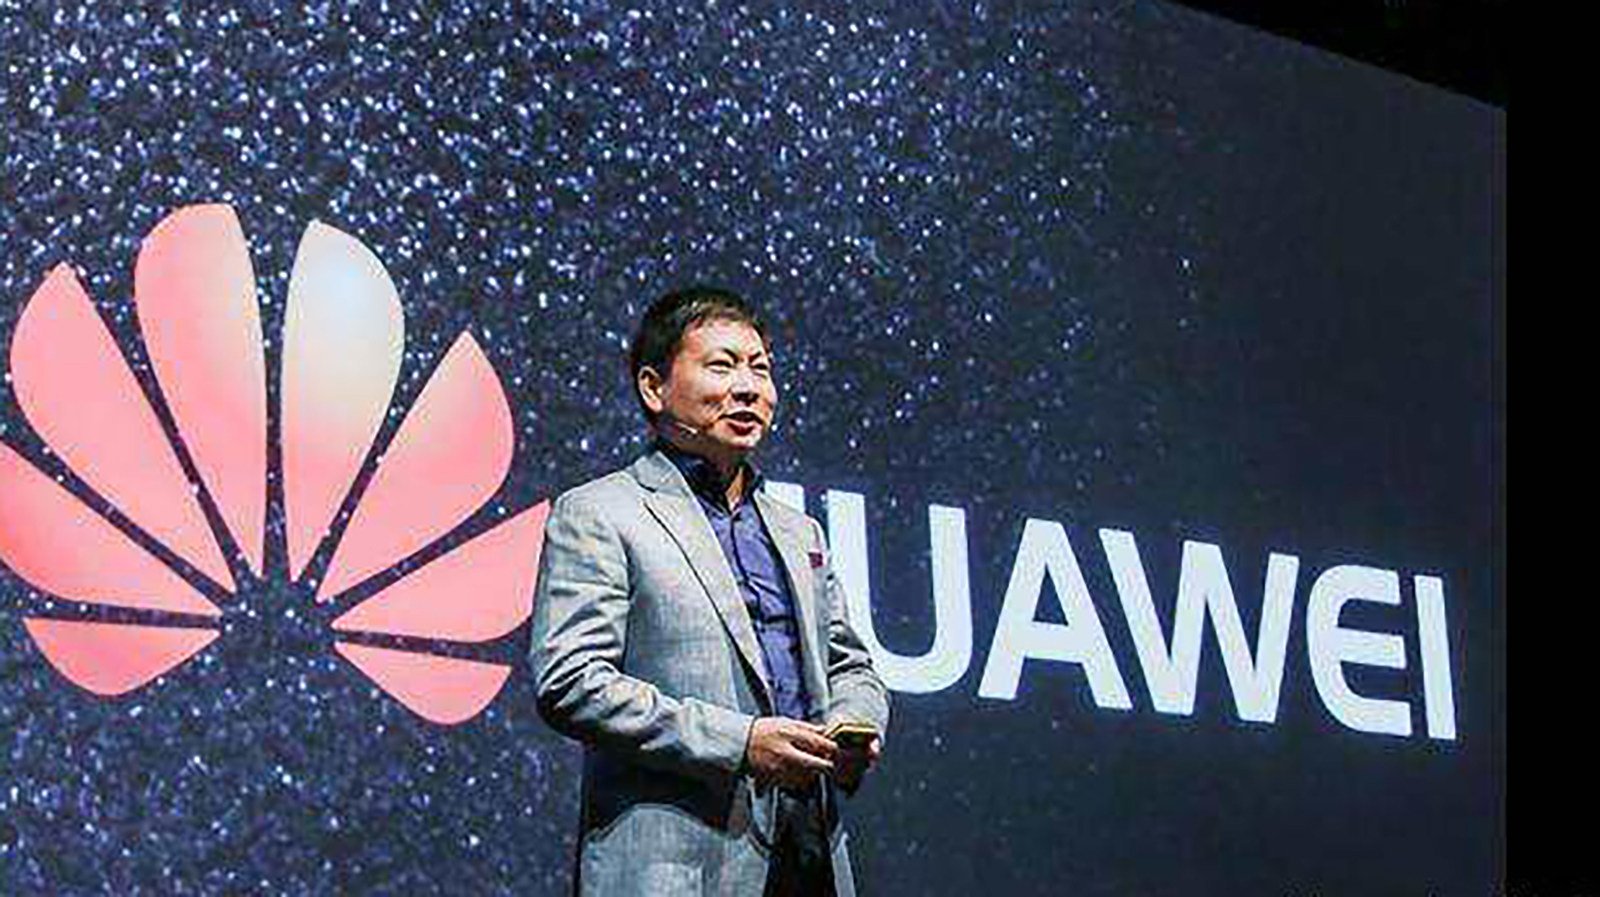 Veteran Huawei Technologies executive Richard Yu Chengdong led the company’s march to become the world’s biggest smartphone vendor in the second quarter of 2020, months after the firm was blacklisted by the US government. Photo: Weibo